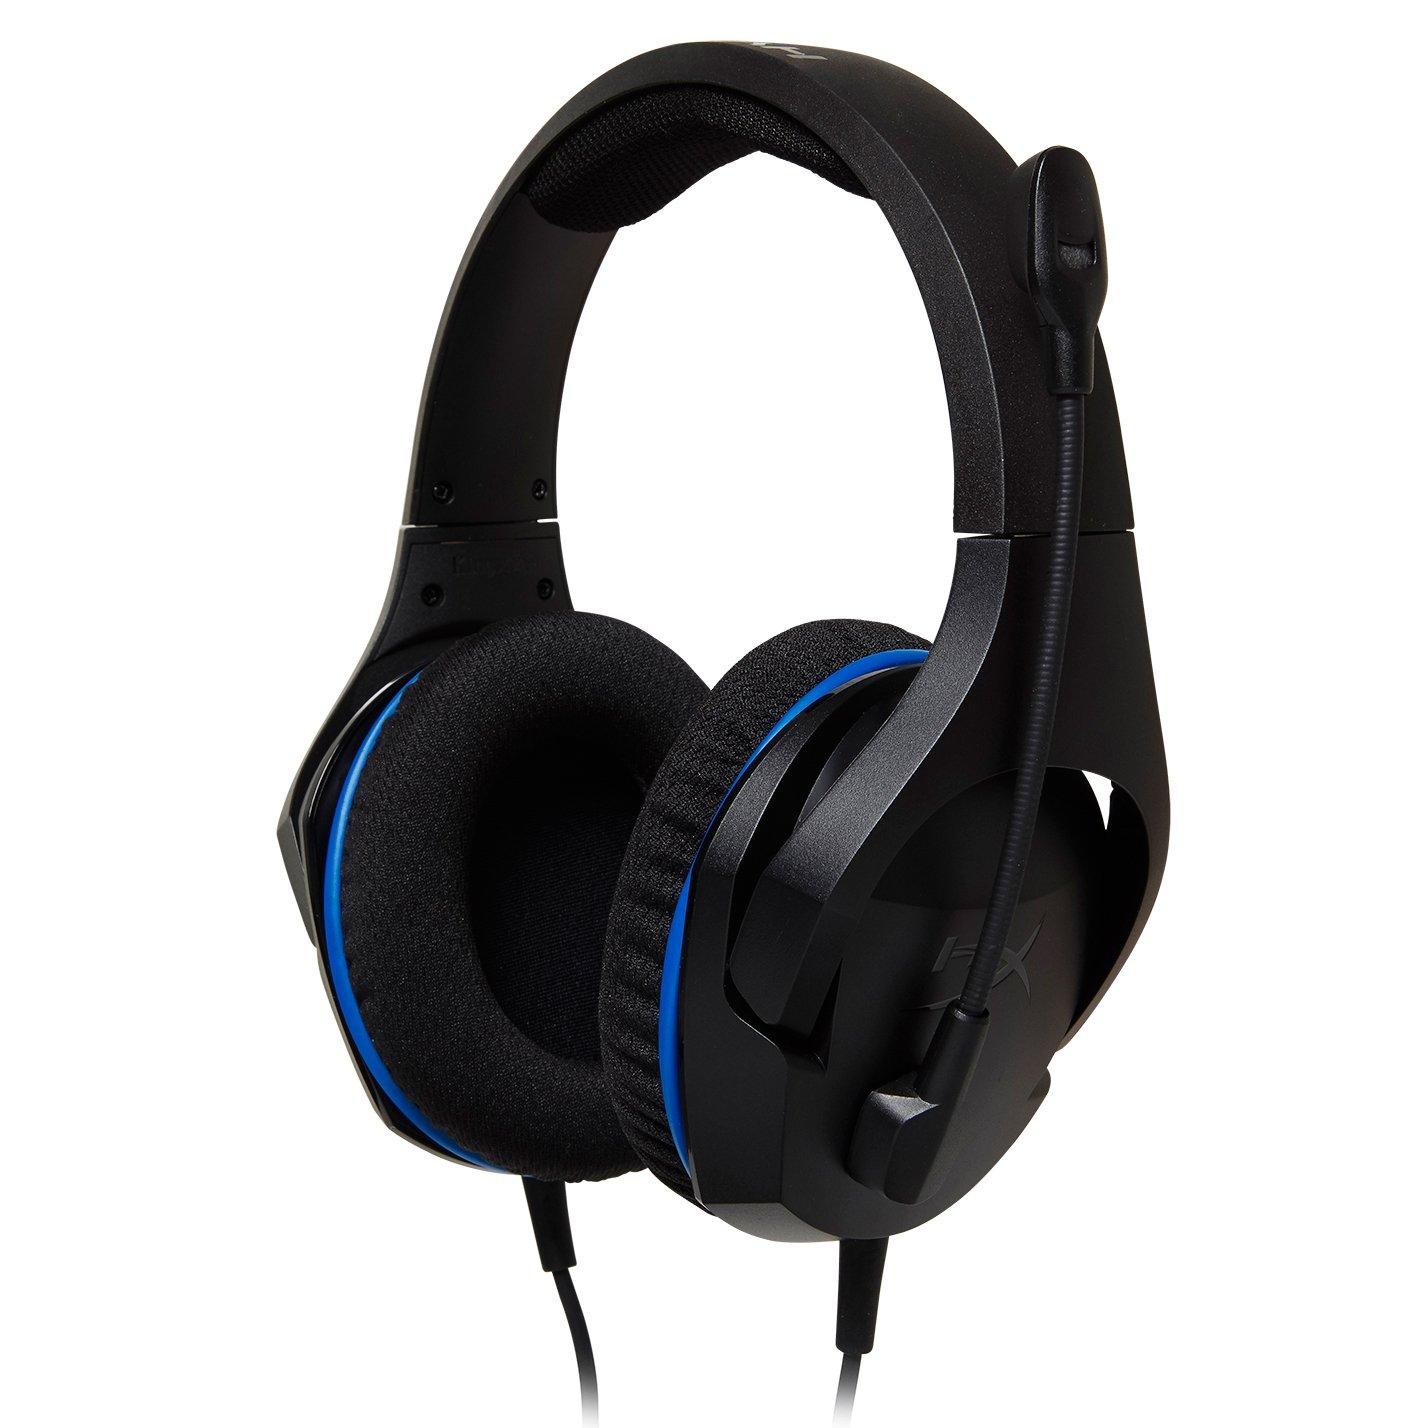 Playstation 4 Hyperx Cloud Stinger Core Wired Gaming Headset